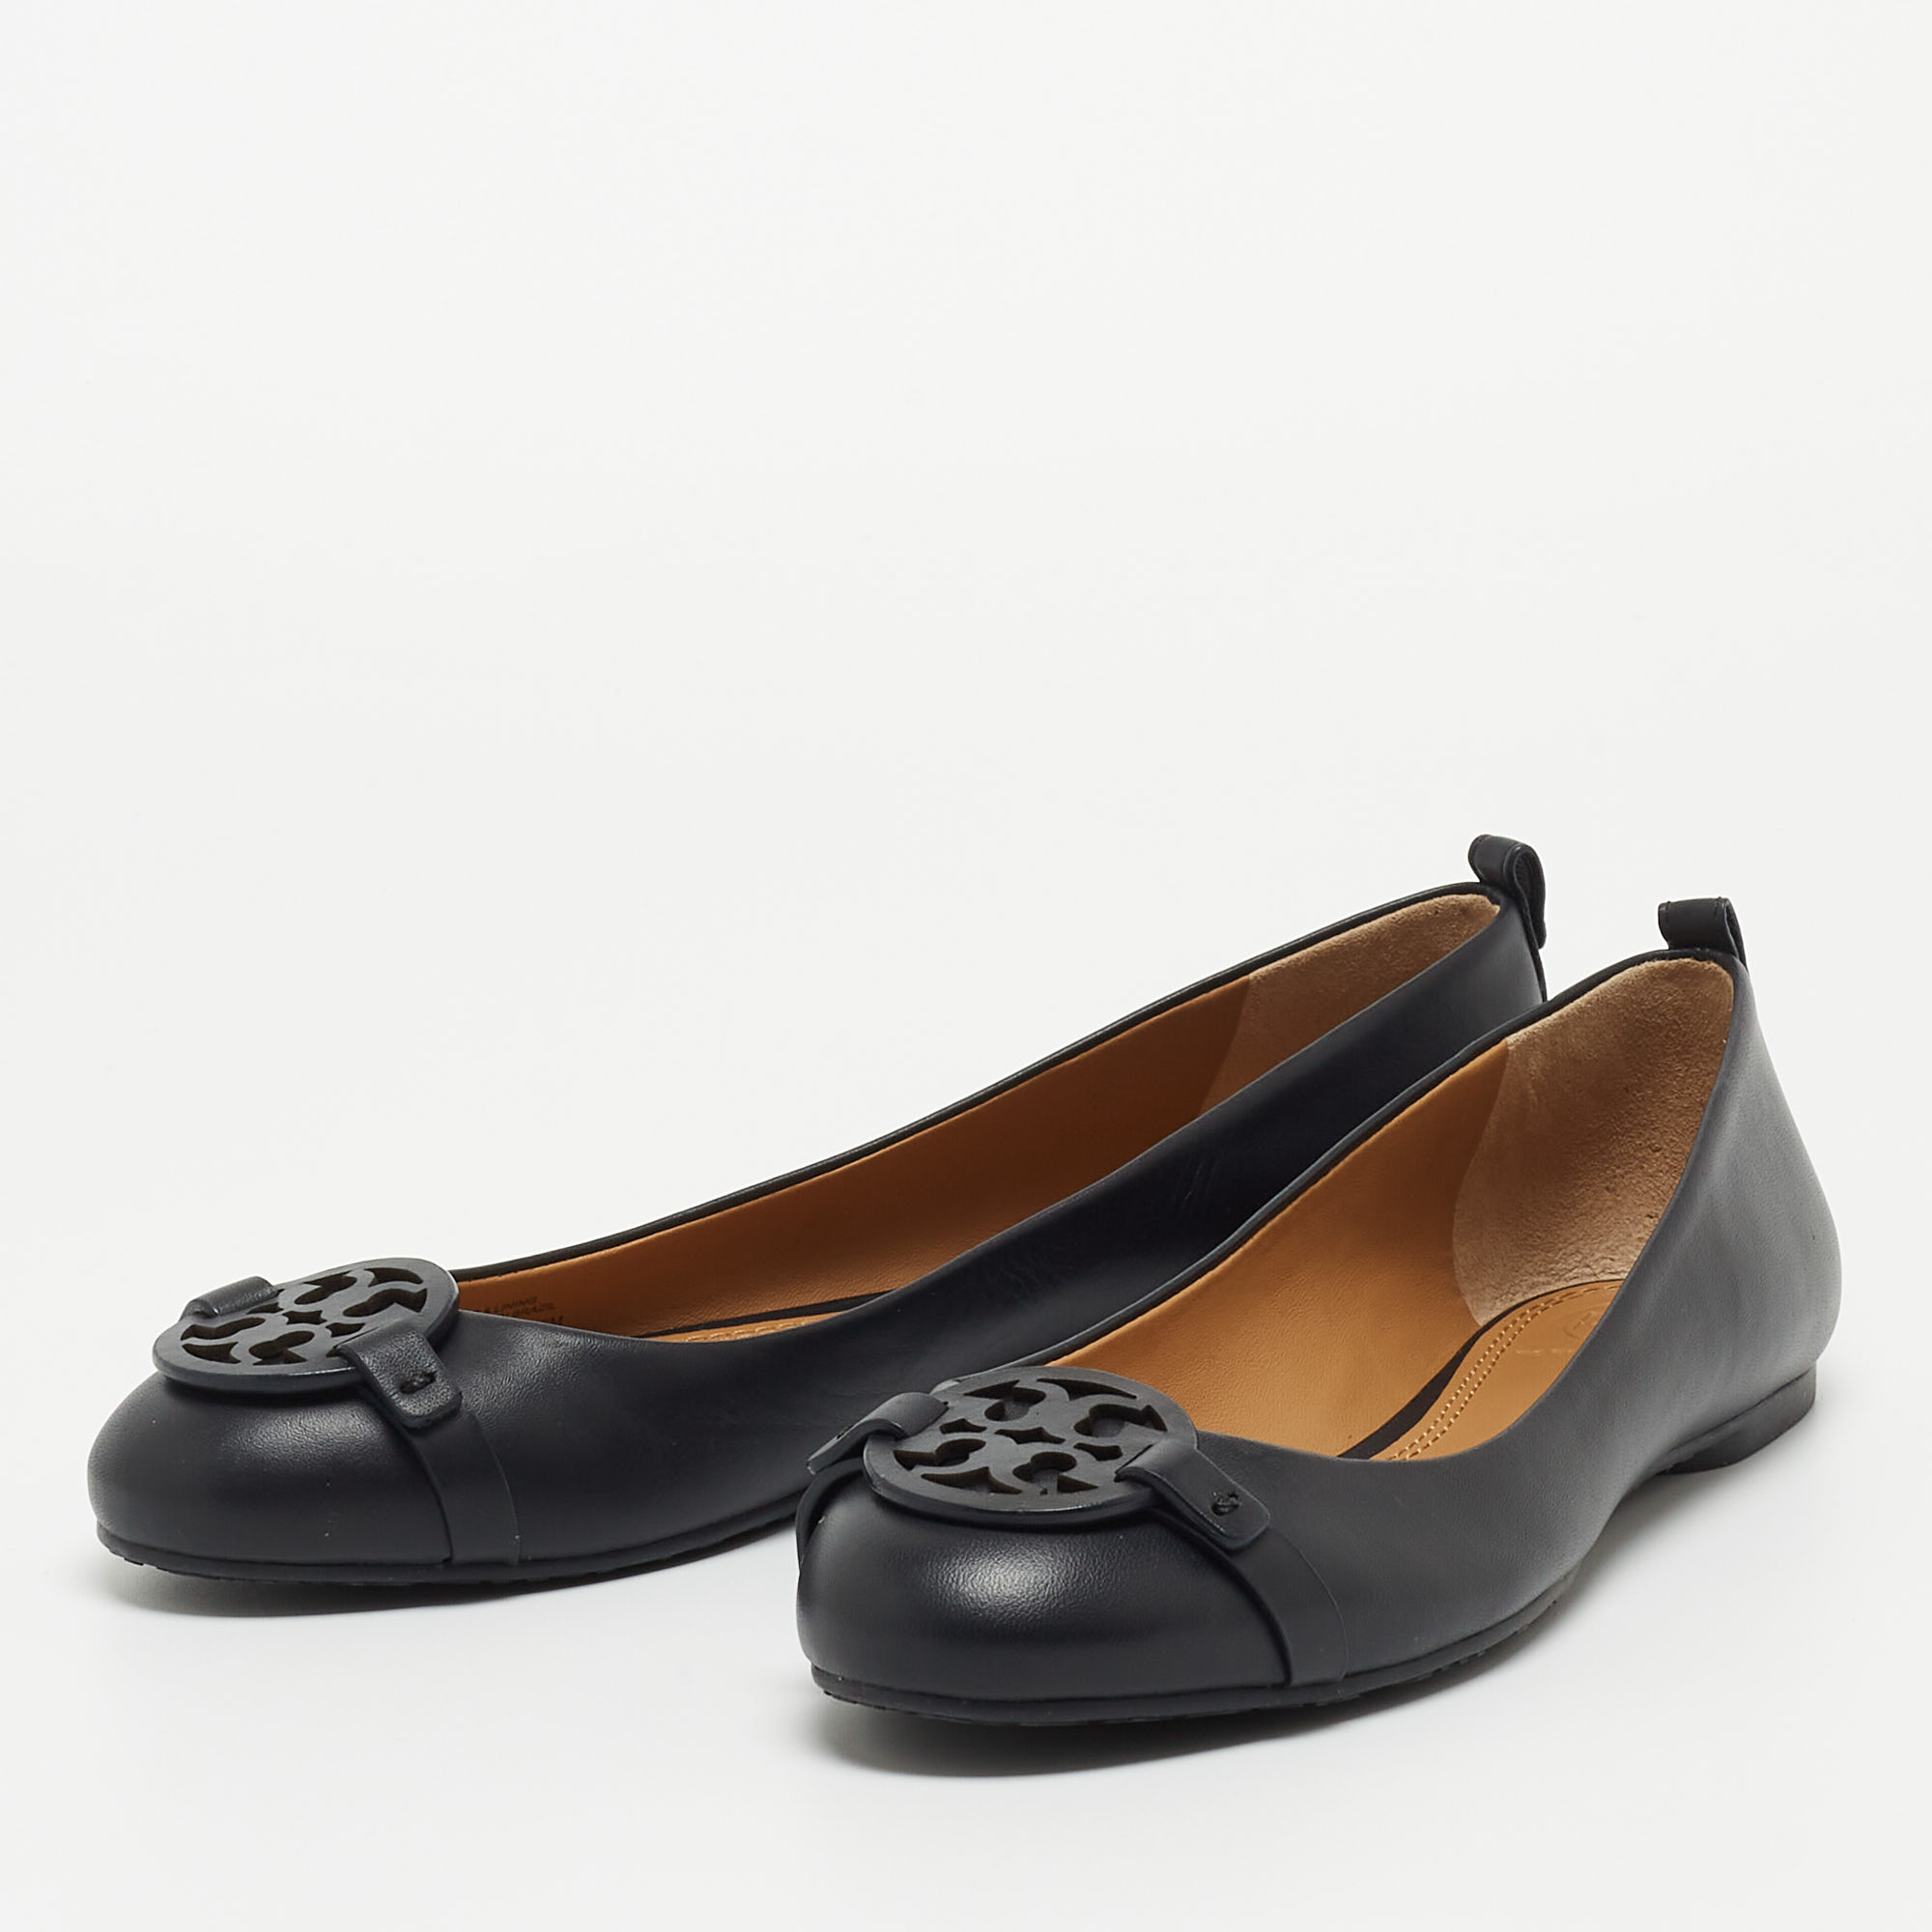 

Tory Burch Black Leather Luisa Micro Ballet Flats Size